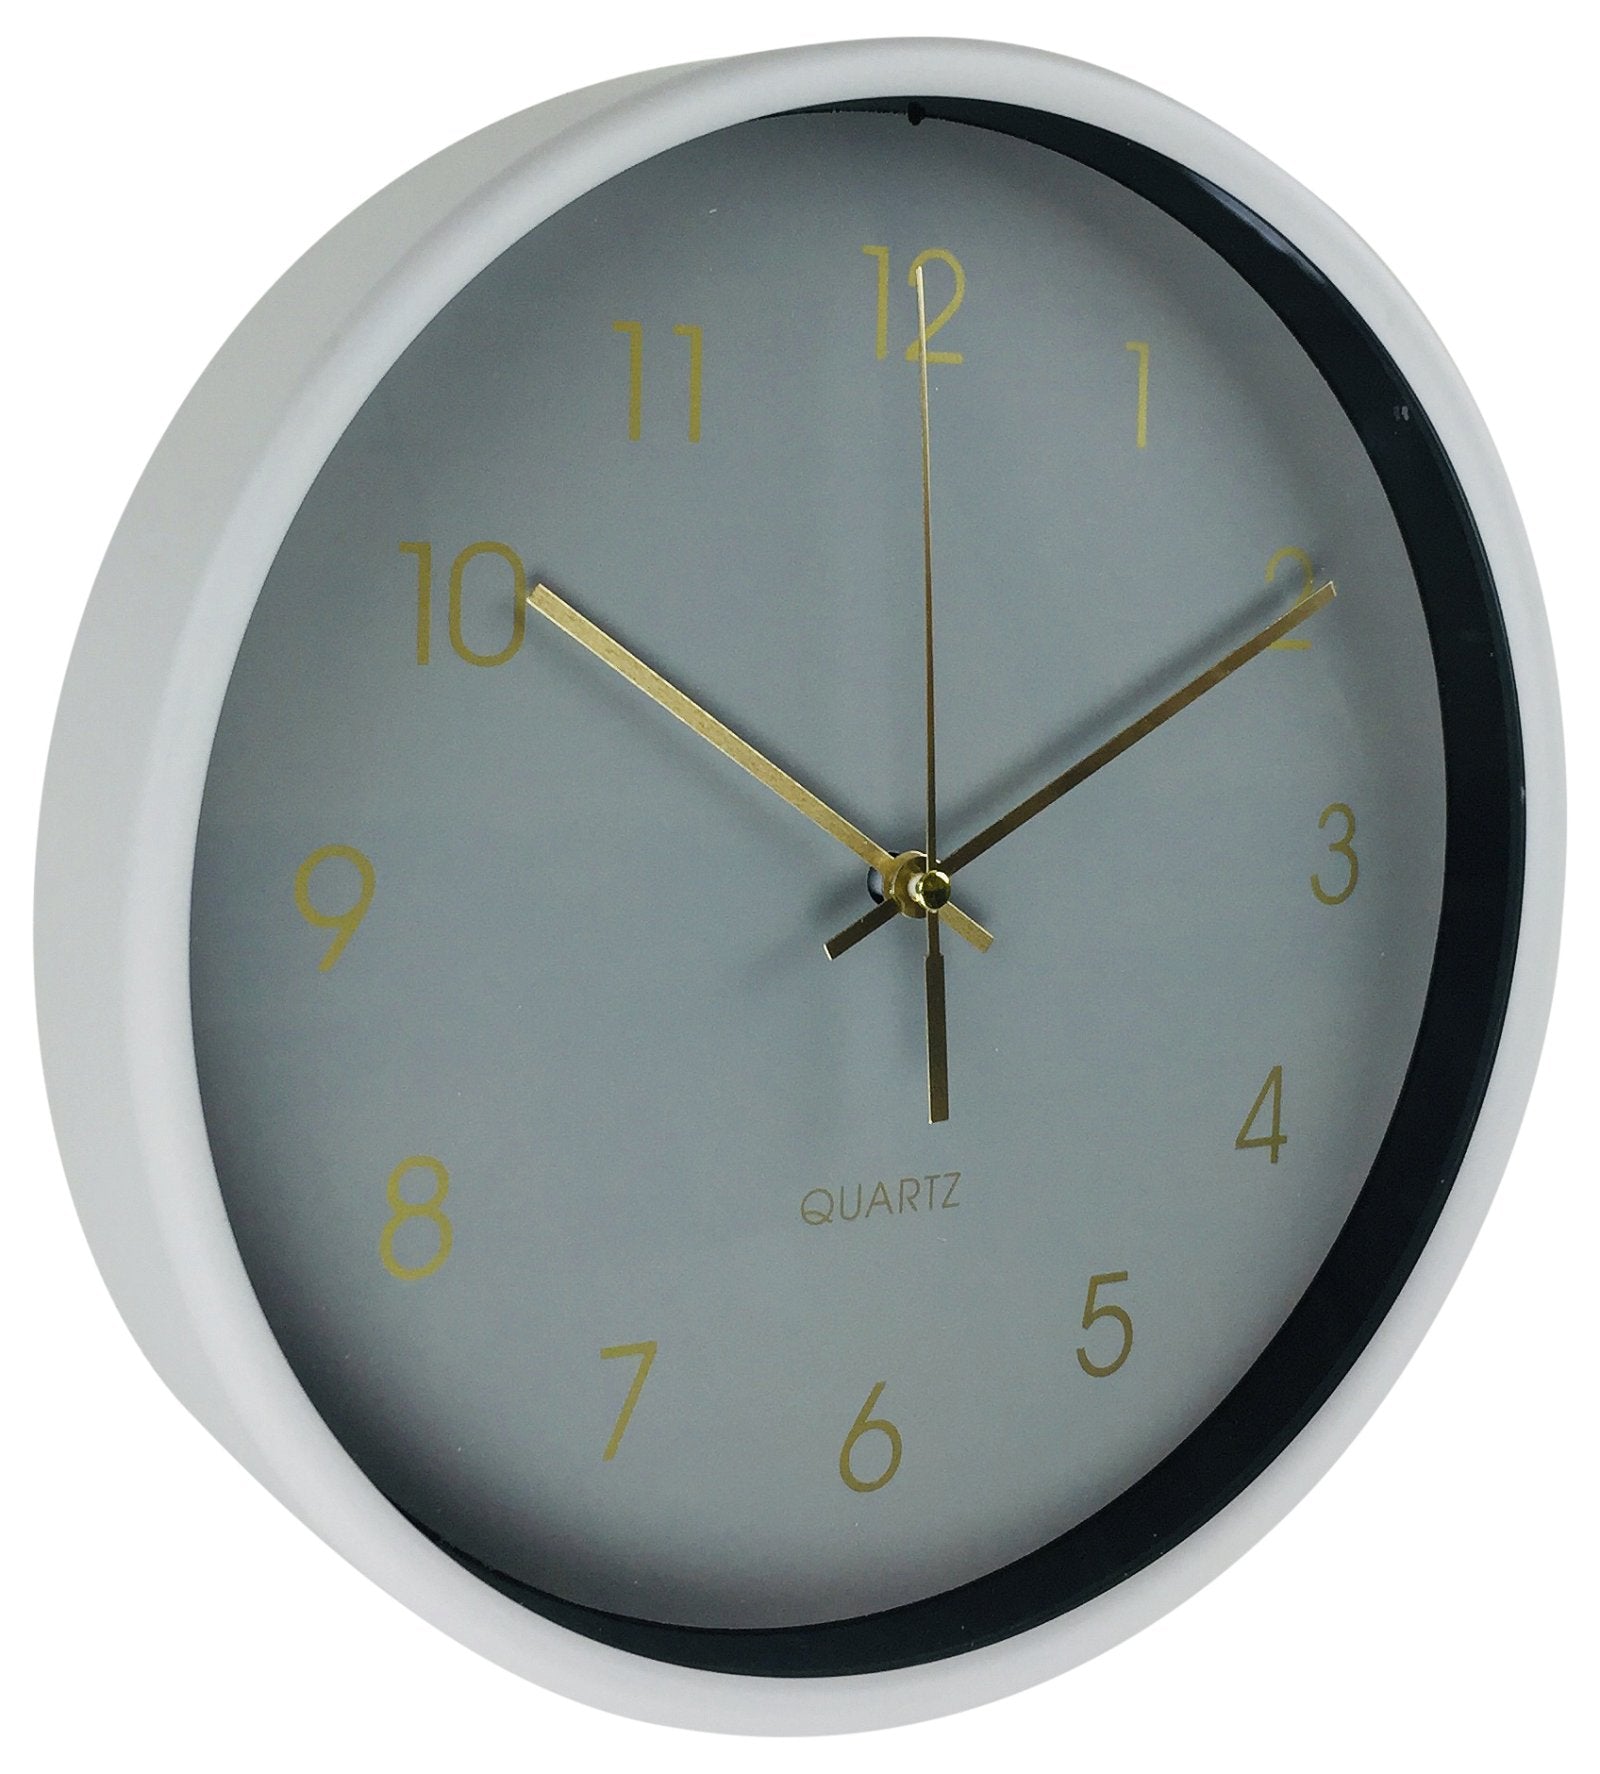 Round Wall Clock In Grey 25cm